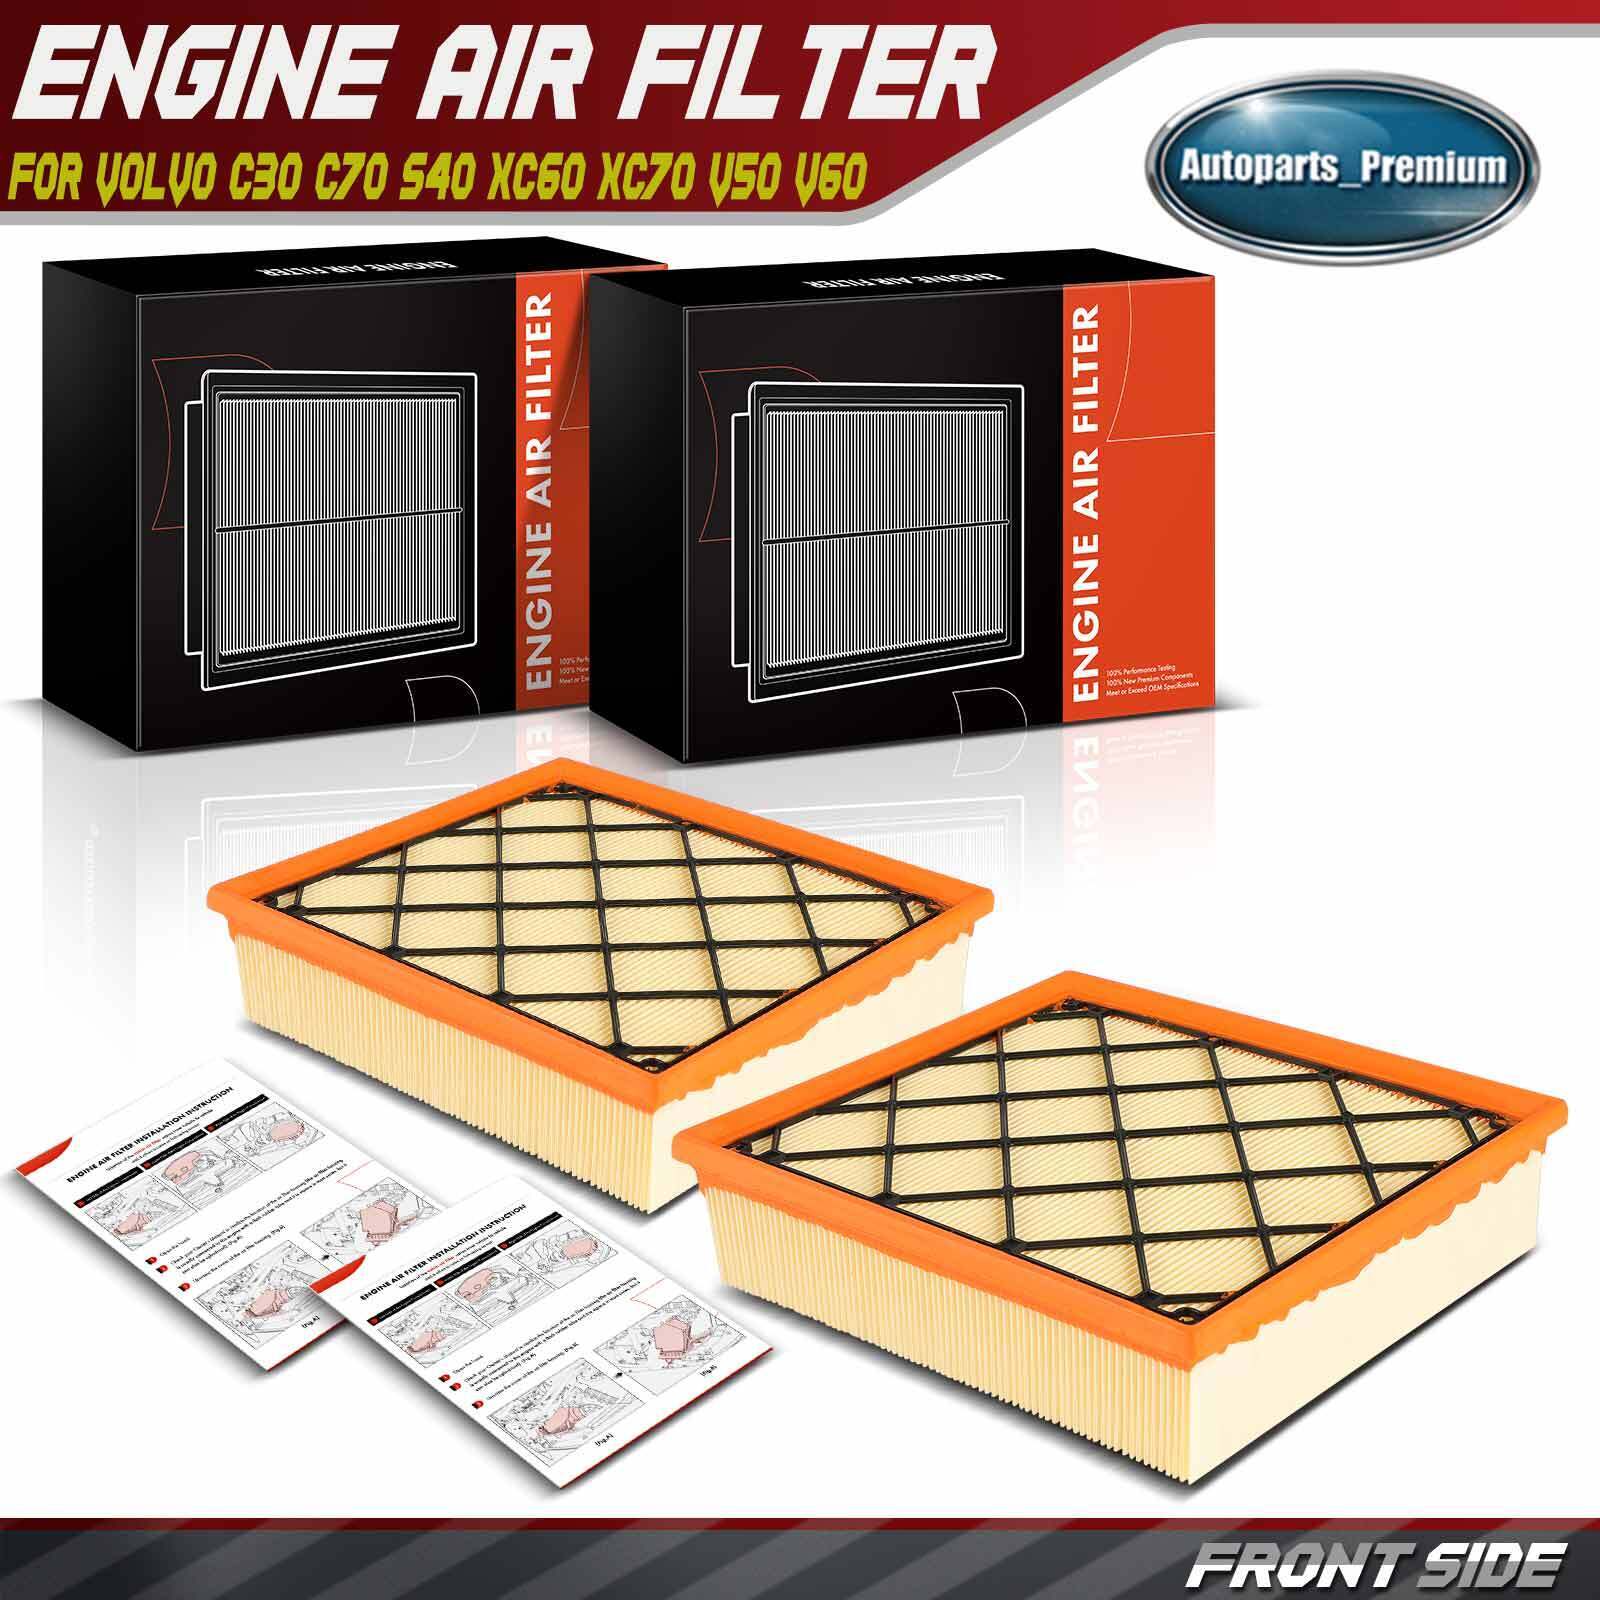 2x Engine Air Filter for Volvo C30 S40 XC60 XC70 V50 V60 Cross Country 2.4L 2.5L